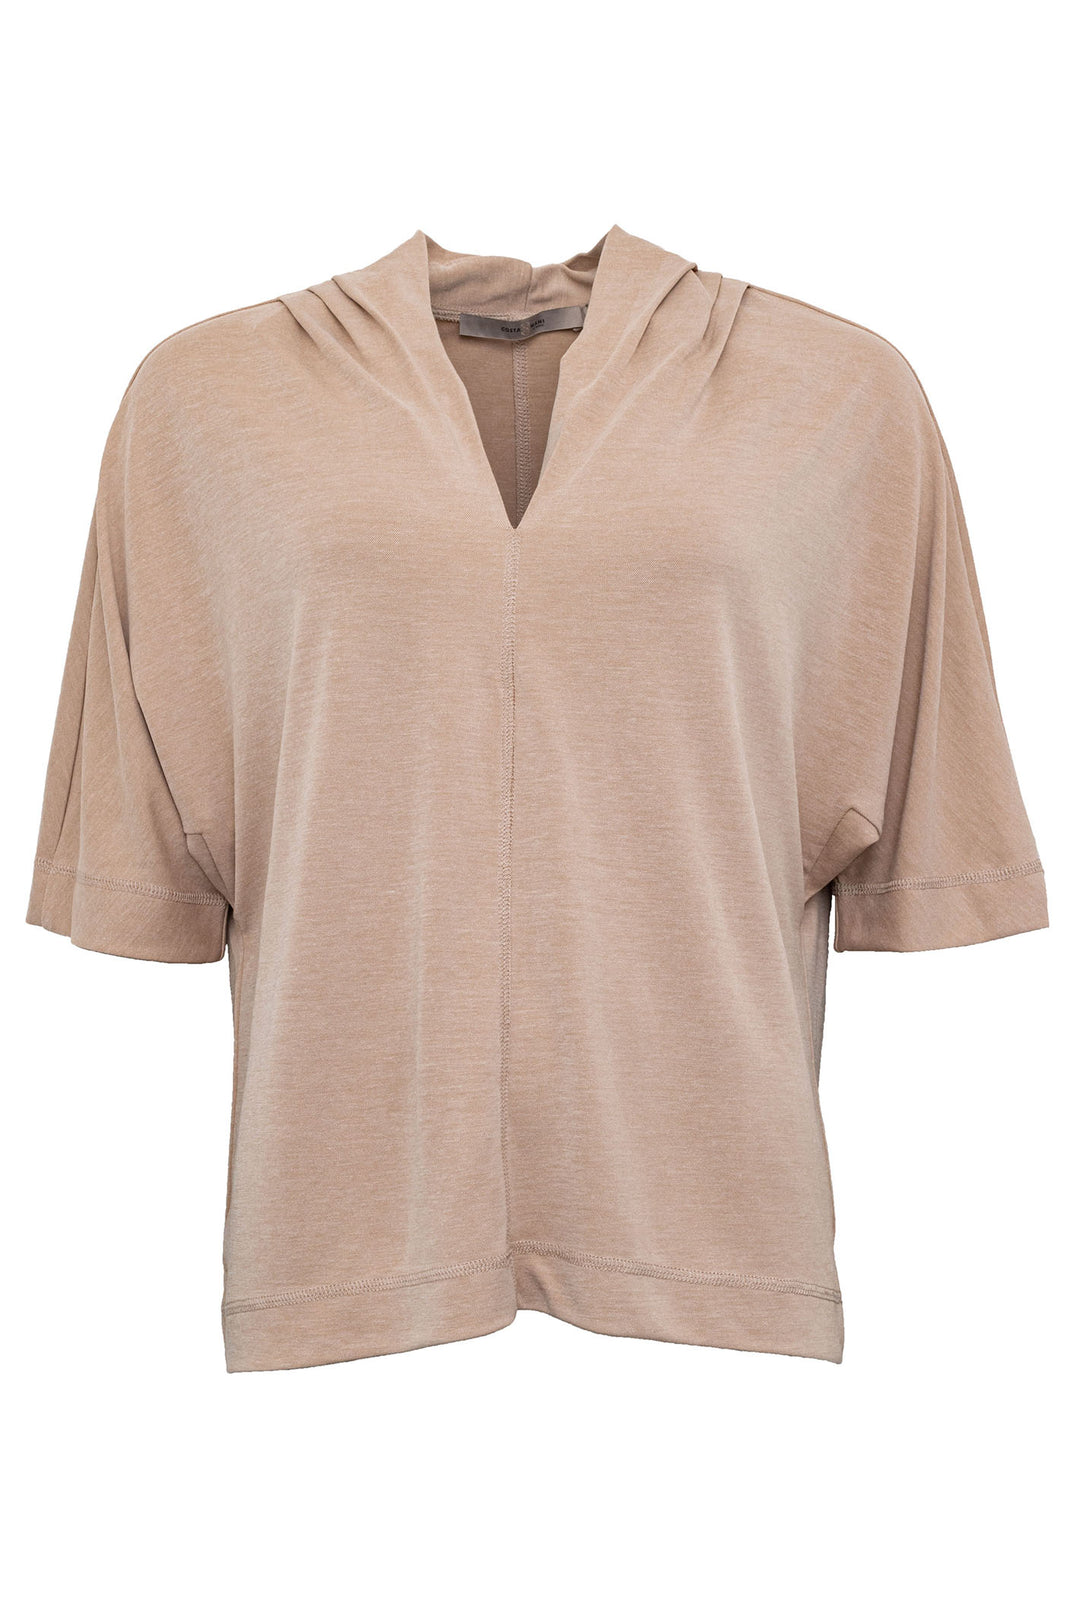 Costa Mani 2401150 Sand Claccy V-Neck Top - Experience Boutique